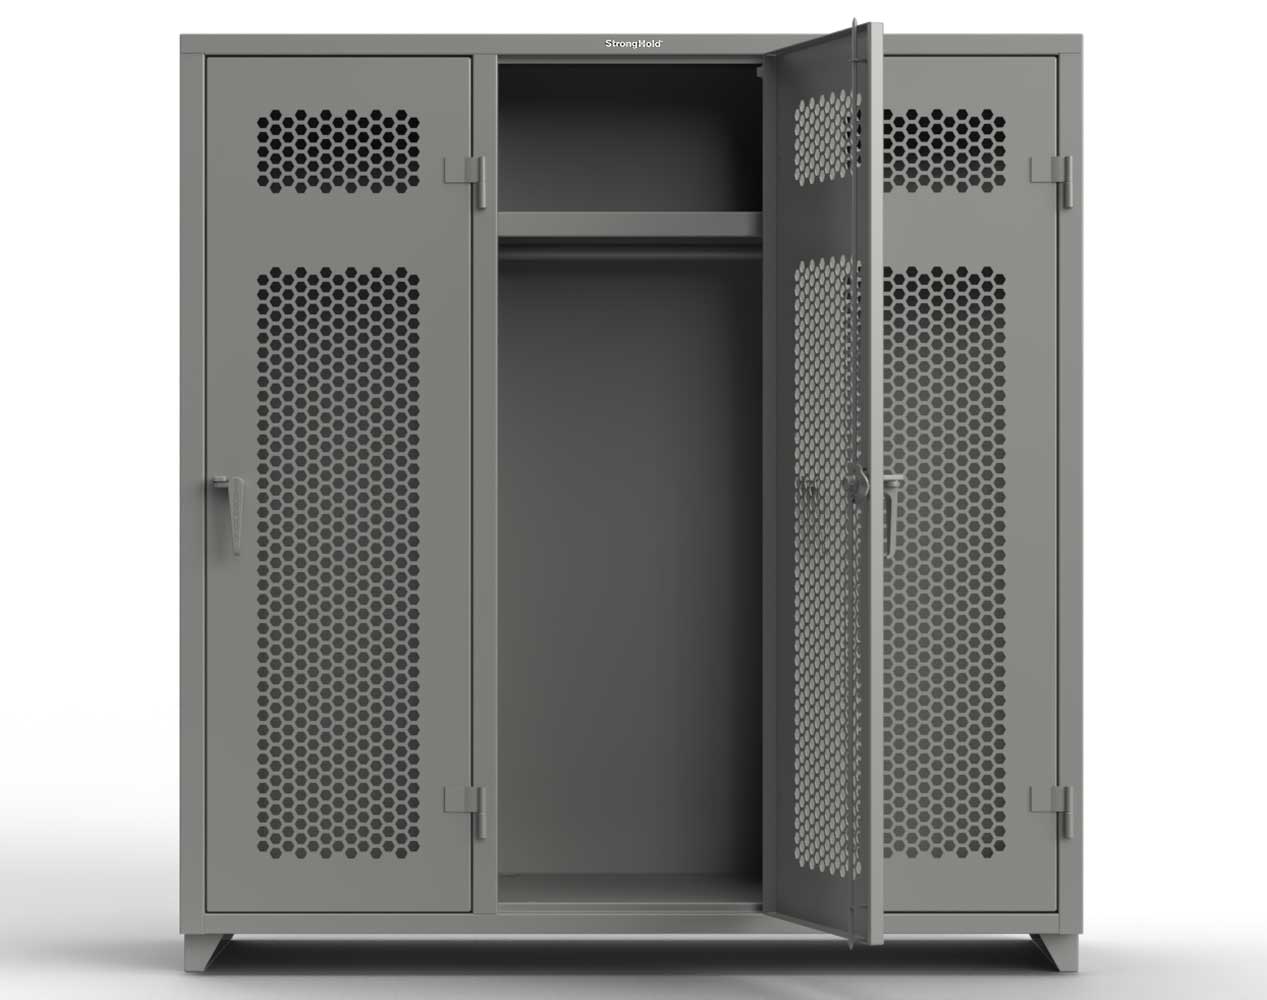 Extra Heavy Duty 14 GA Ventilated Single-Tier Locker with Shelf and Hanger Rod, 3 Compartments - 72 in. W x 24 in. D x 75 in. H